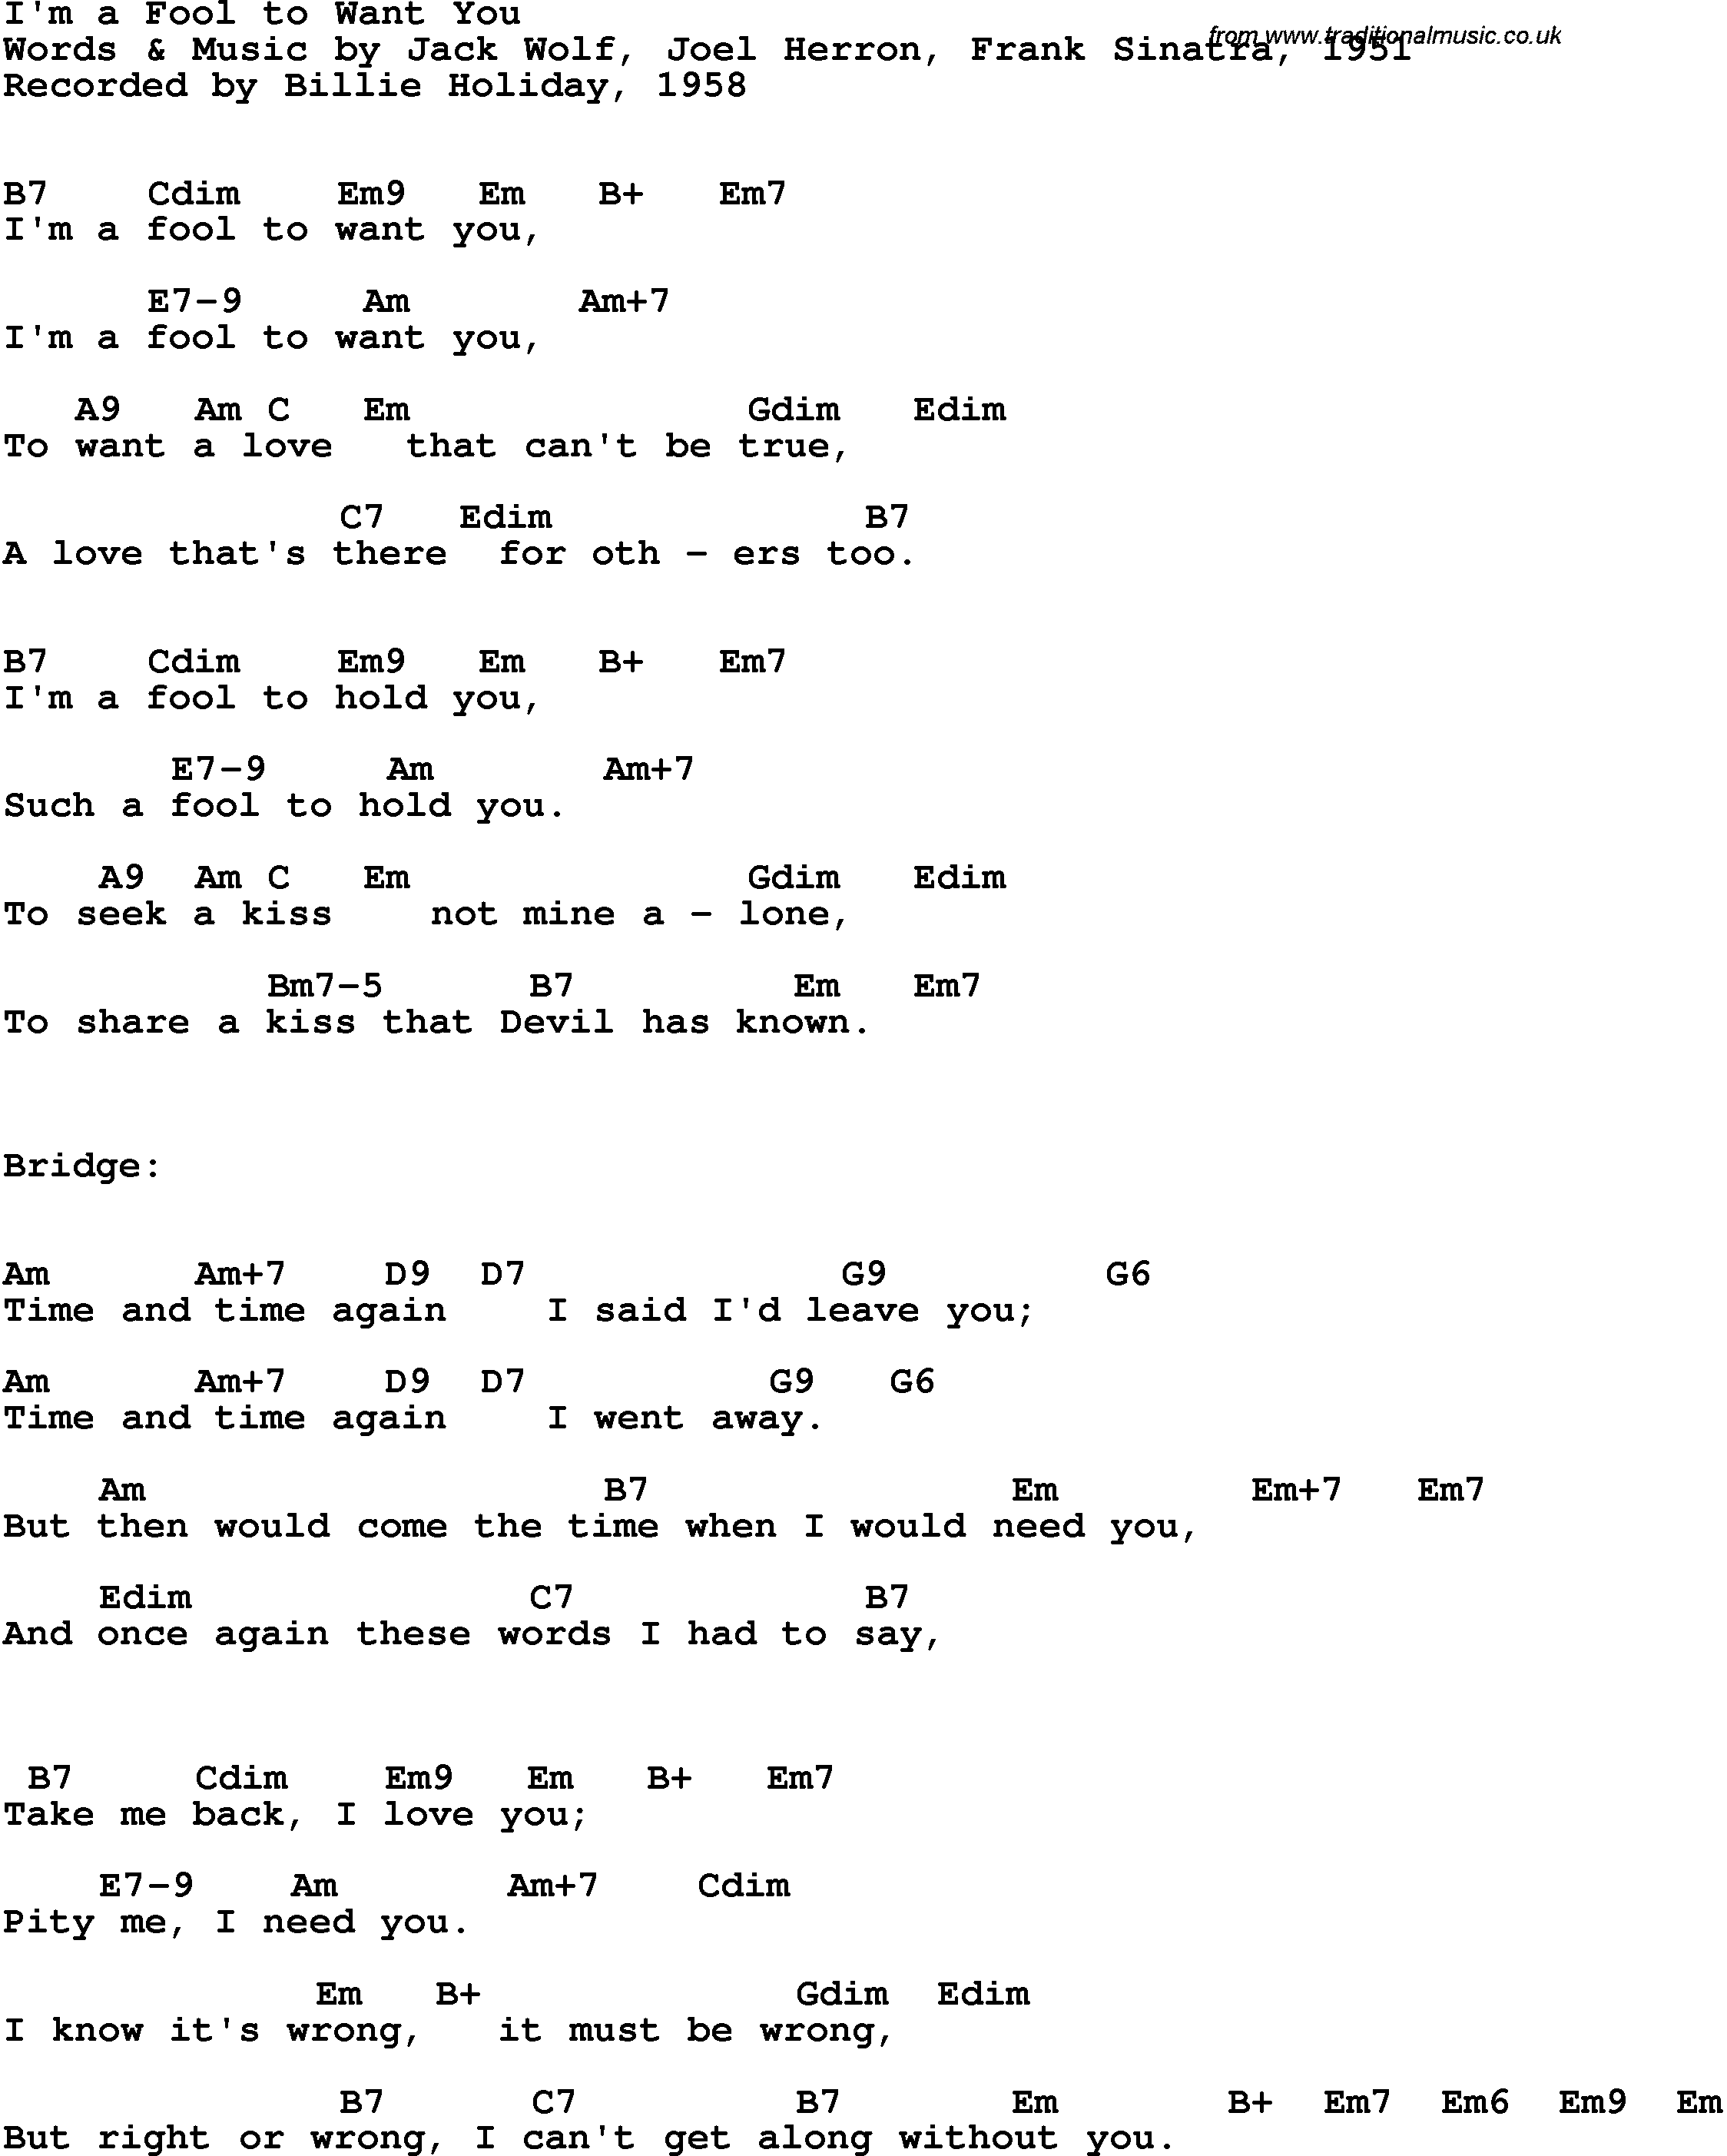 Song Lyrics with guitar chords for I'm A Fool To Want You - Billie Holiday, 1958